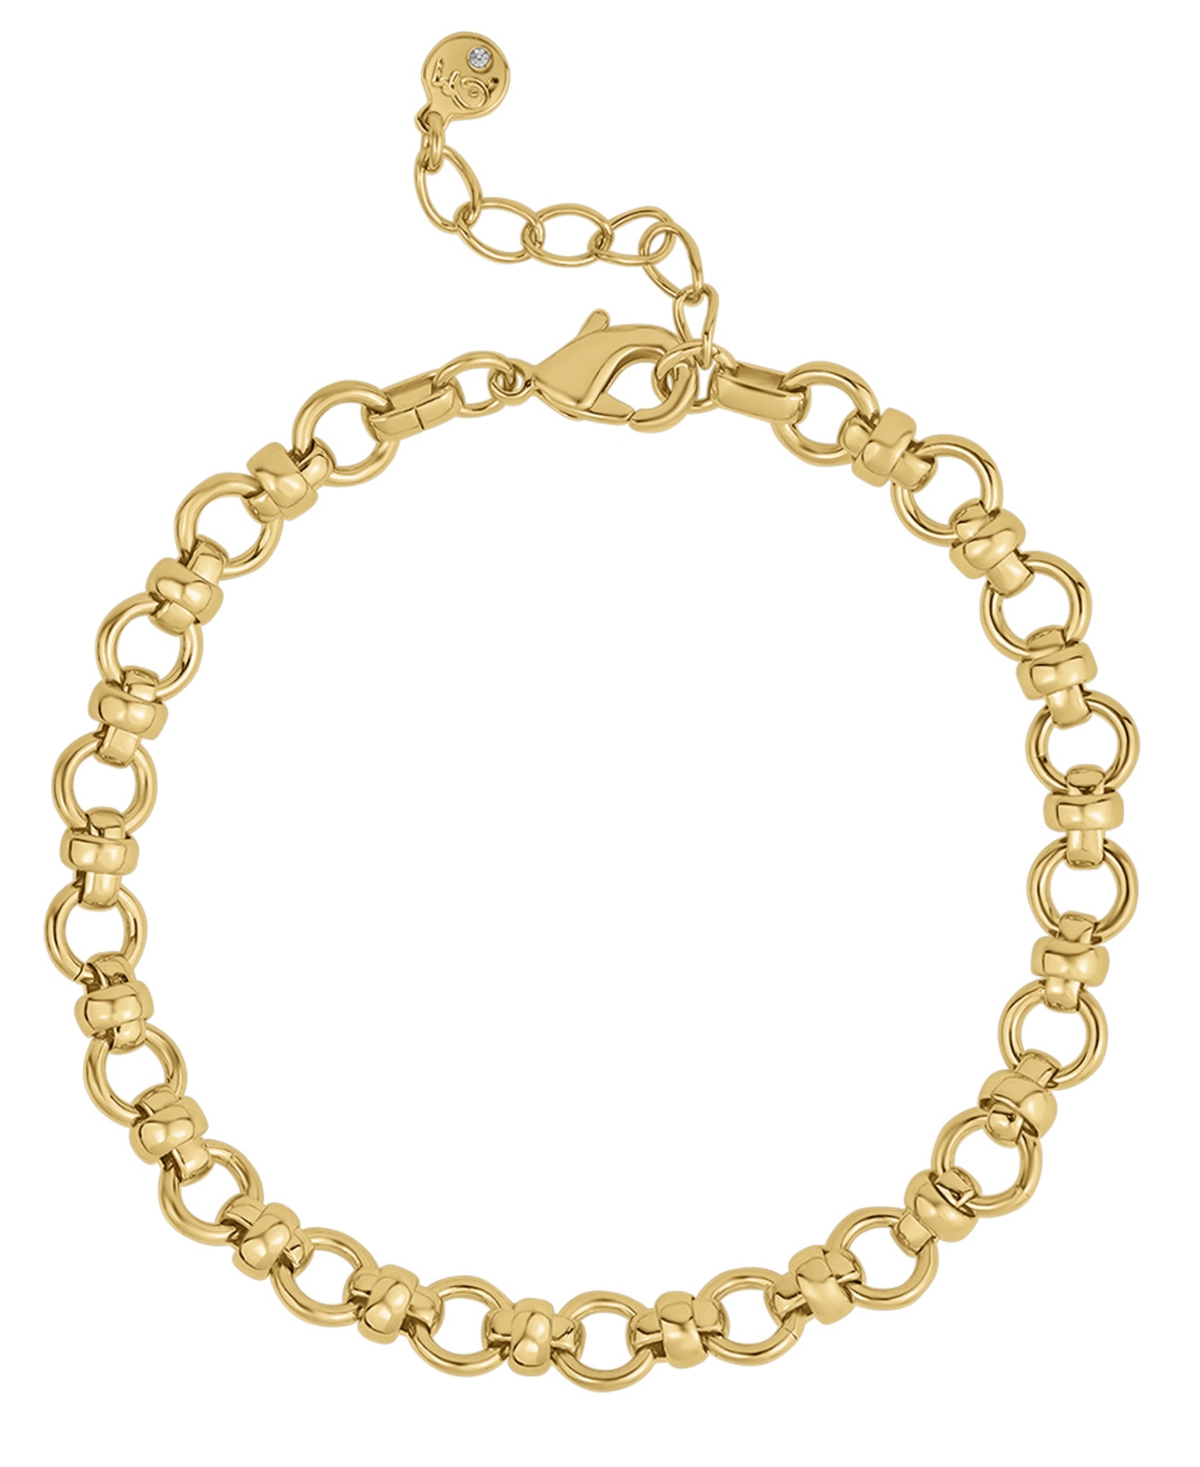 Fine Silver-Plated or 18K Gold-Plated Circle Link Bracelet - Gold